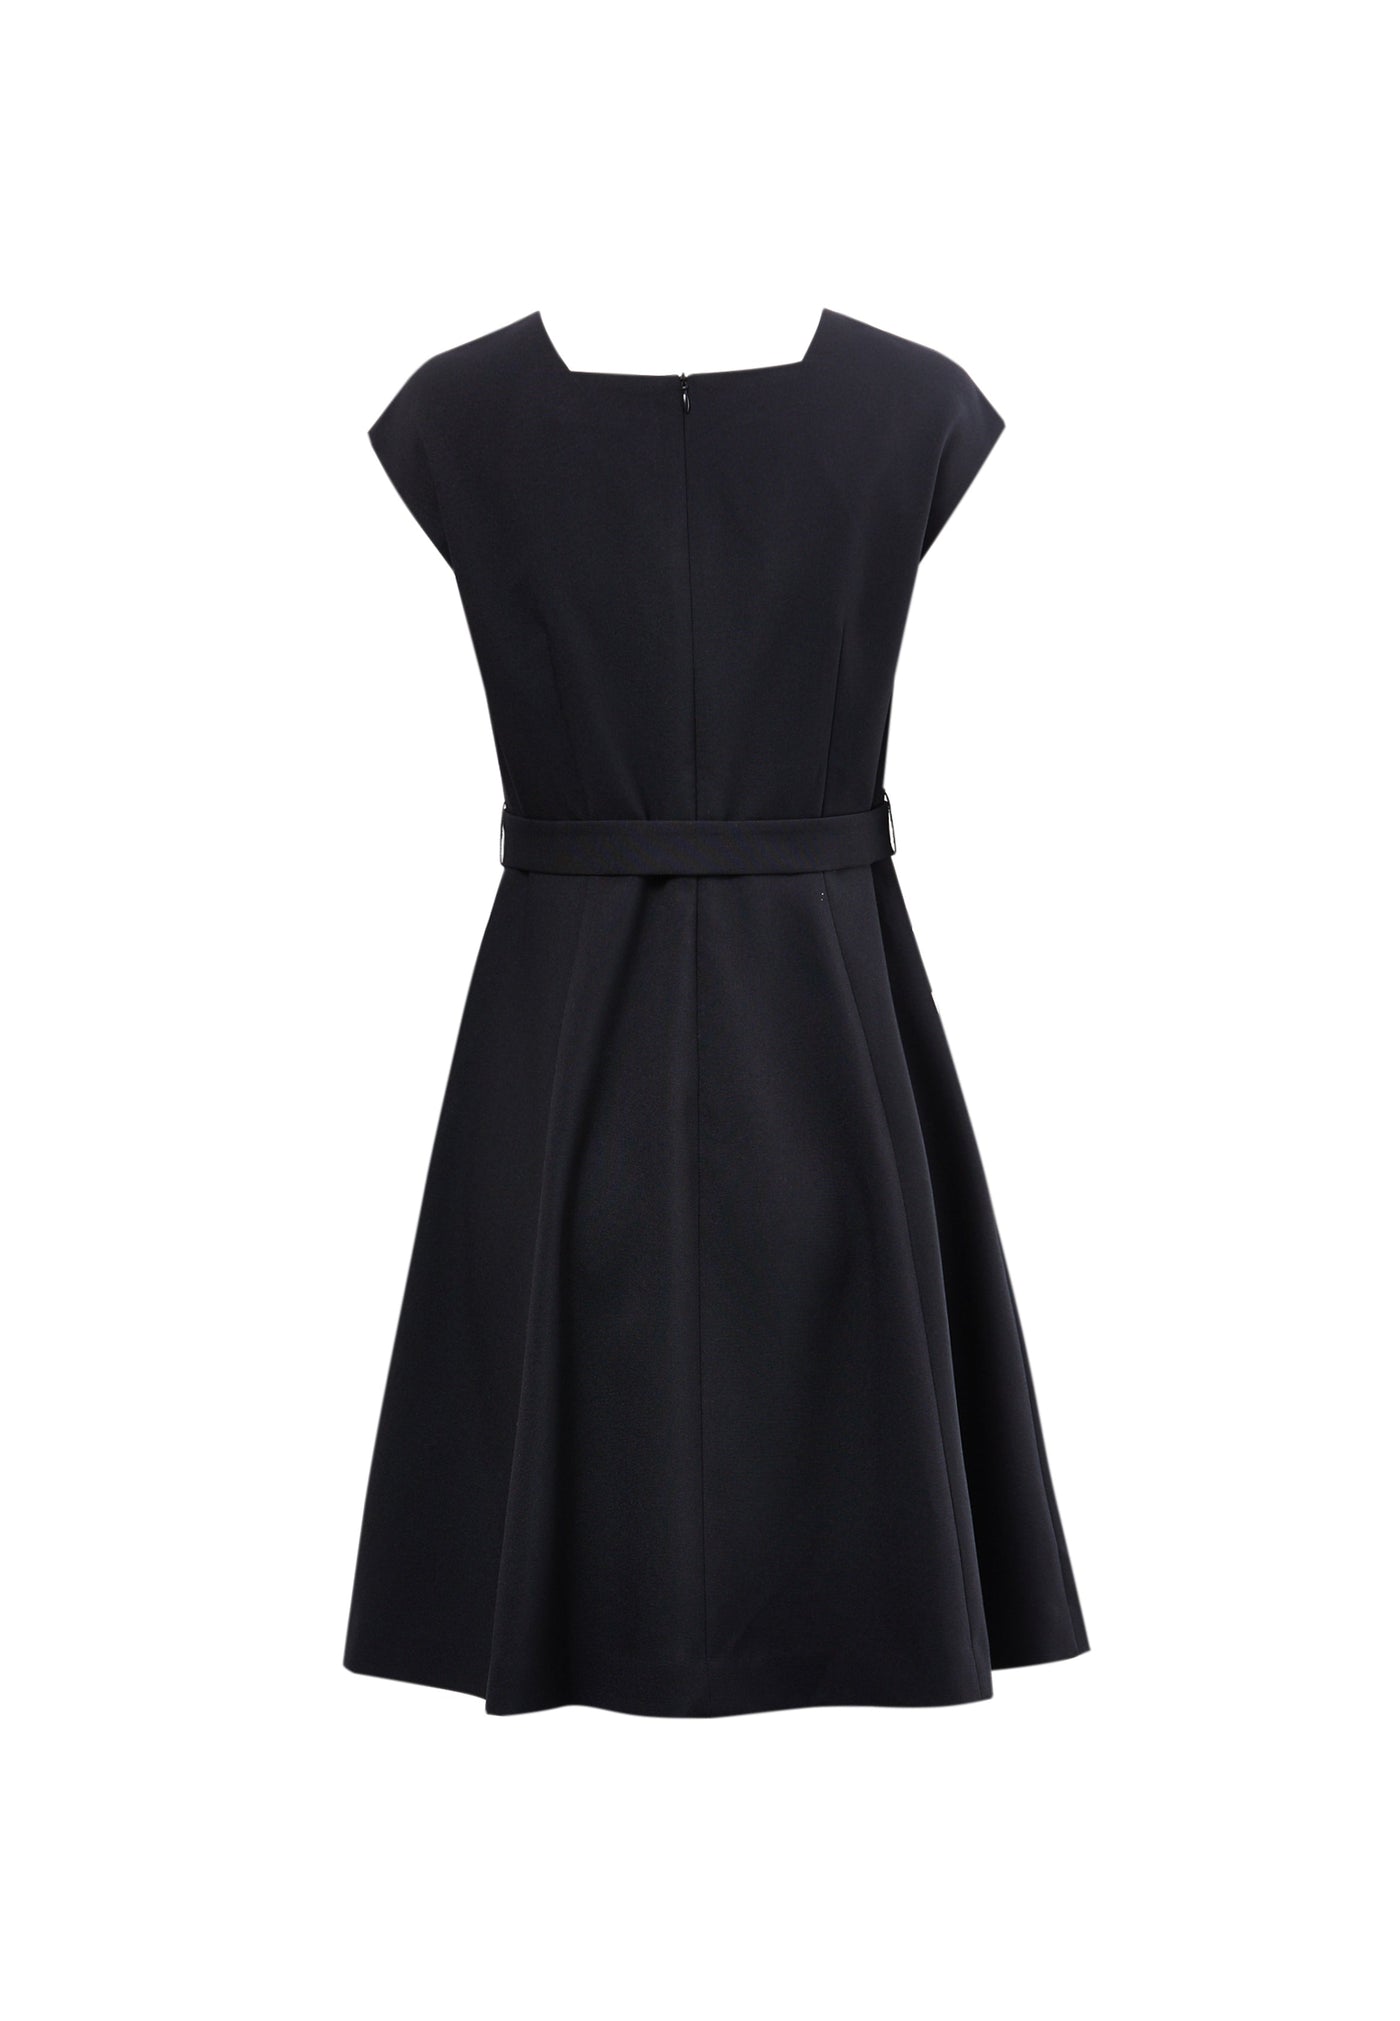 Women Round - Neck Dress With Delicate Metal Buckle - Fit & Flare Shape